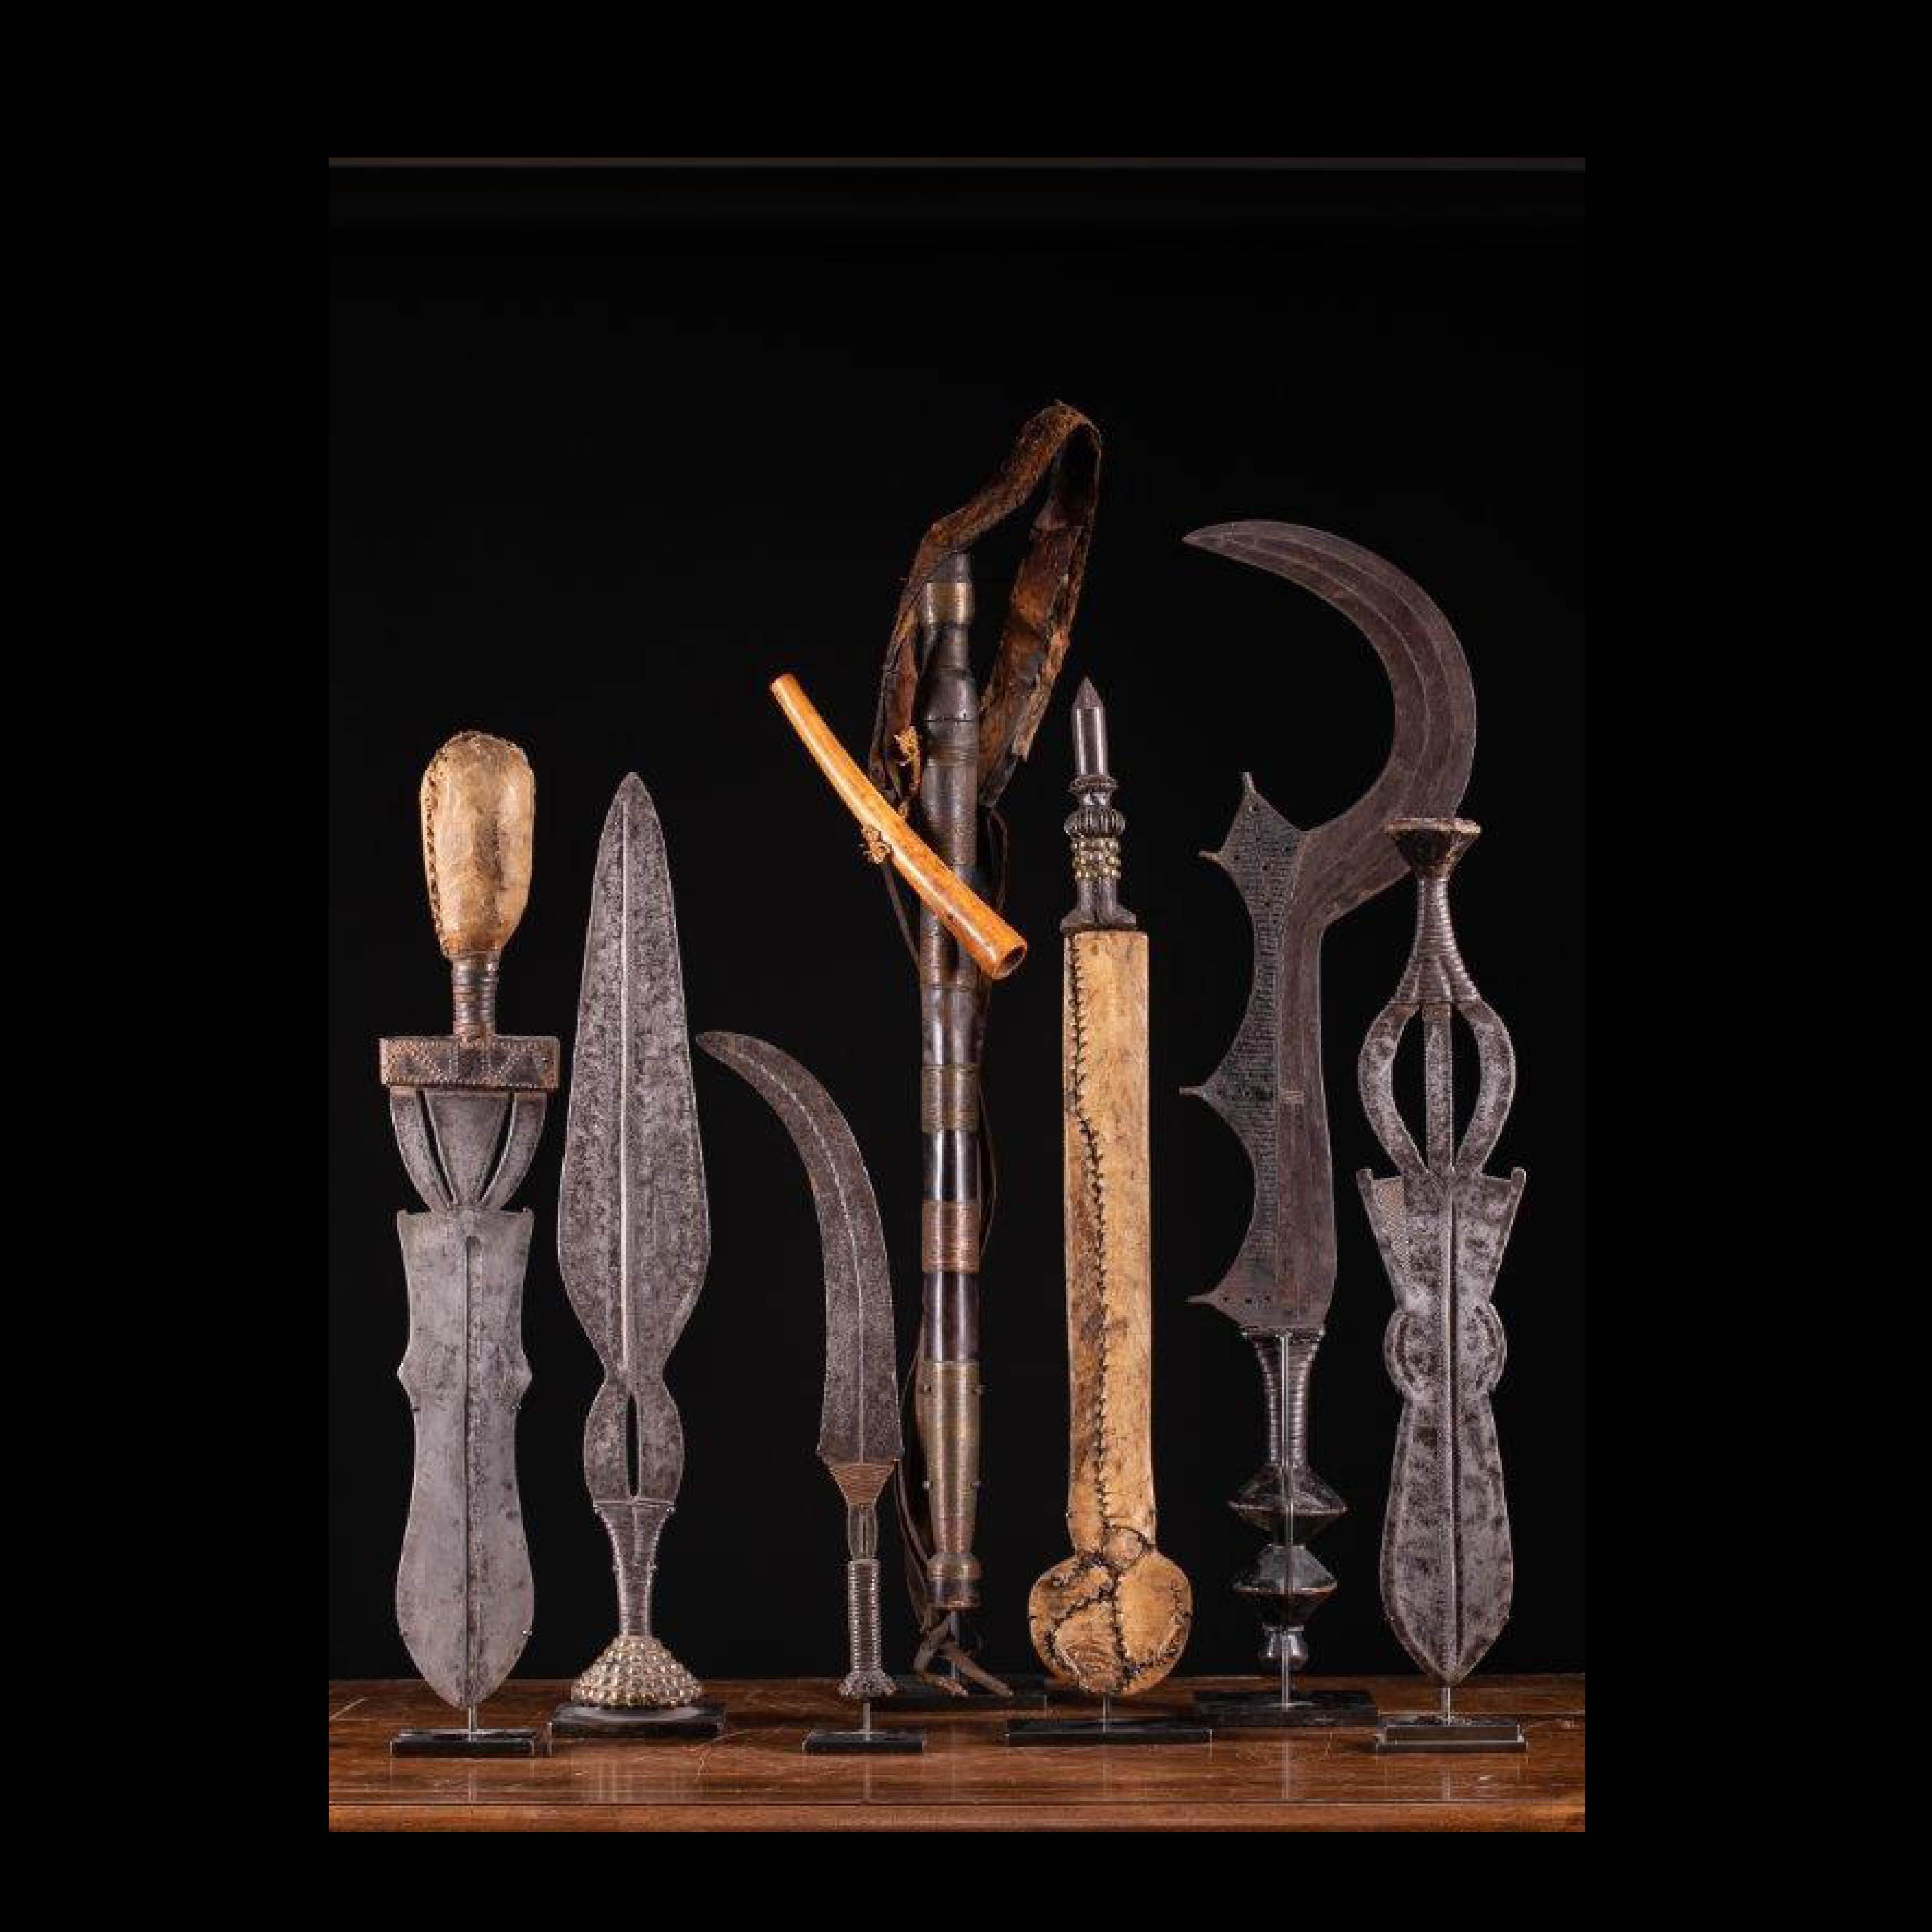 The knives were handmade with heavily decorated Forged Iron blades with embellished wooden handles. They would use brass or leather wrappings and tacks that turned their weapons into insignia of prestige, ceremonial dance implements, and valuables